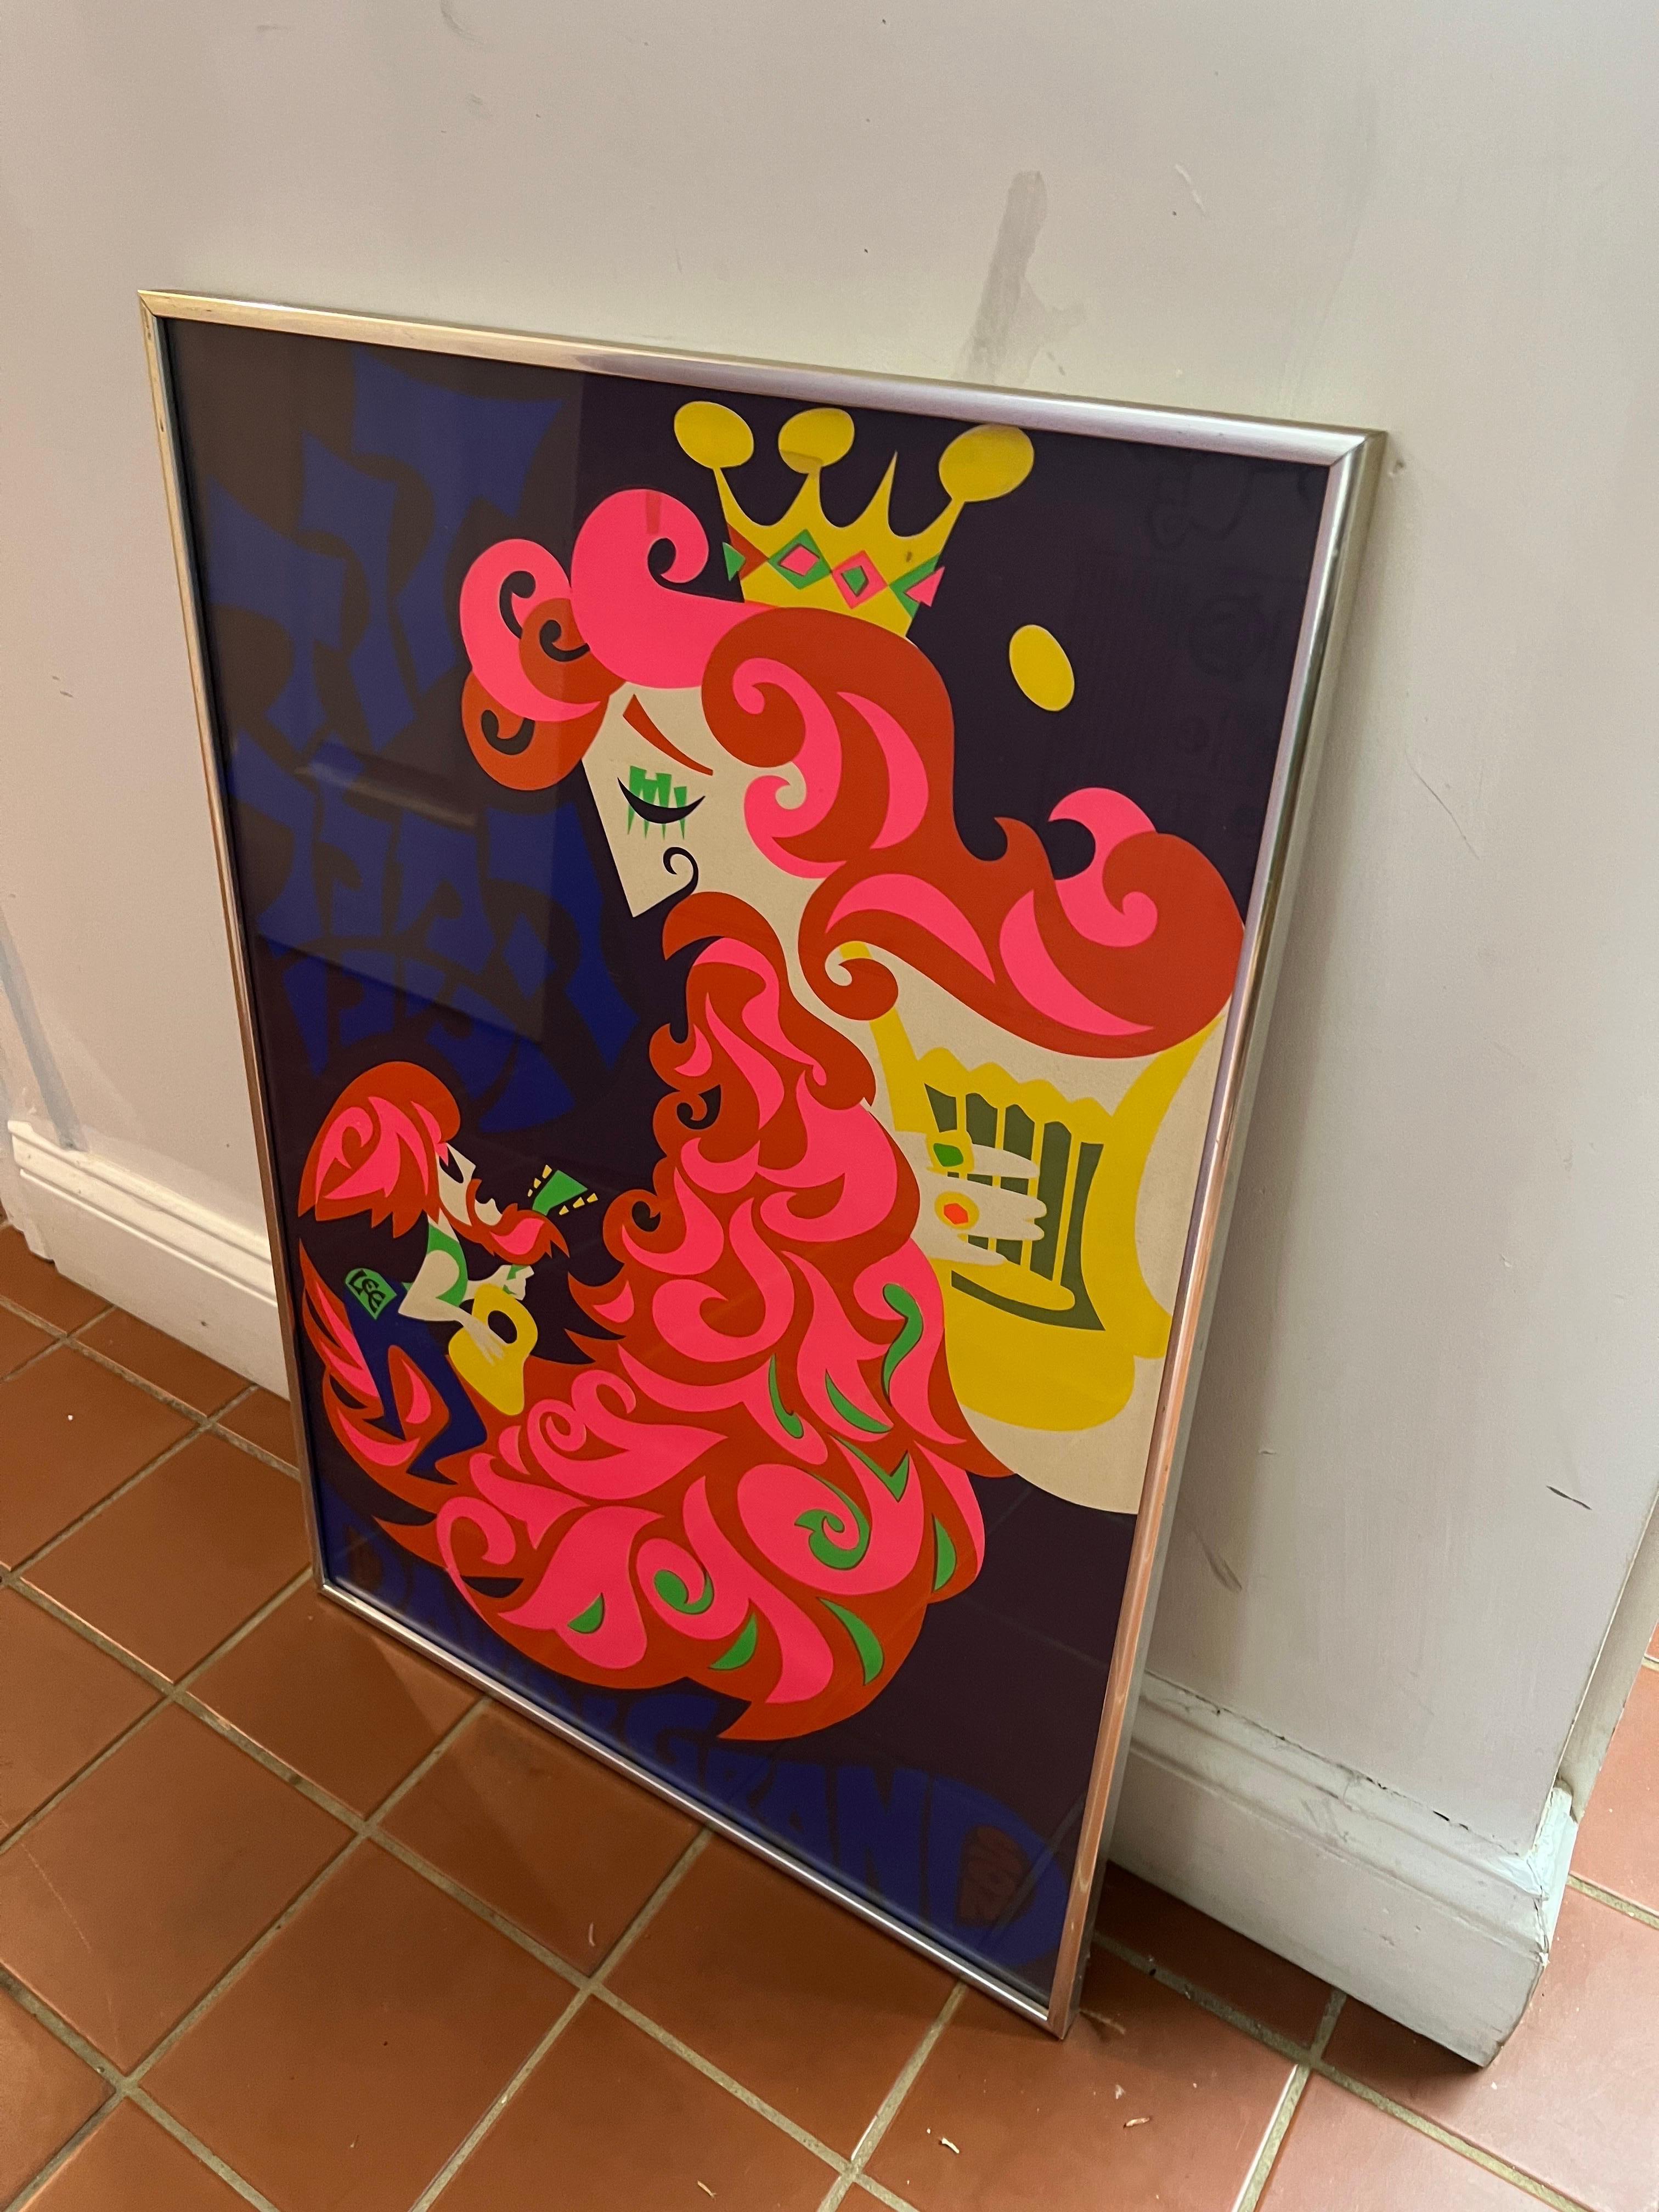 1960’s Psychedelic Pop Art Poster of King David by Lee In Good Condition For Sale In Redding, CT